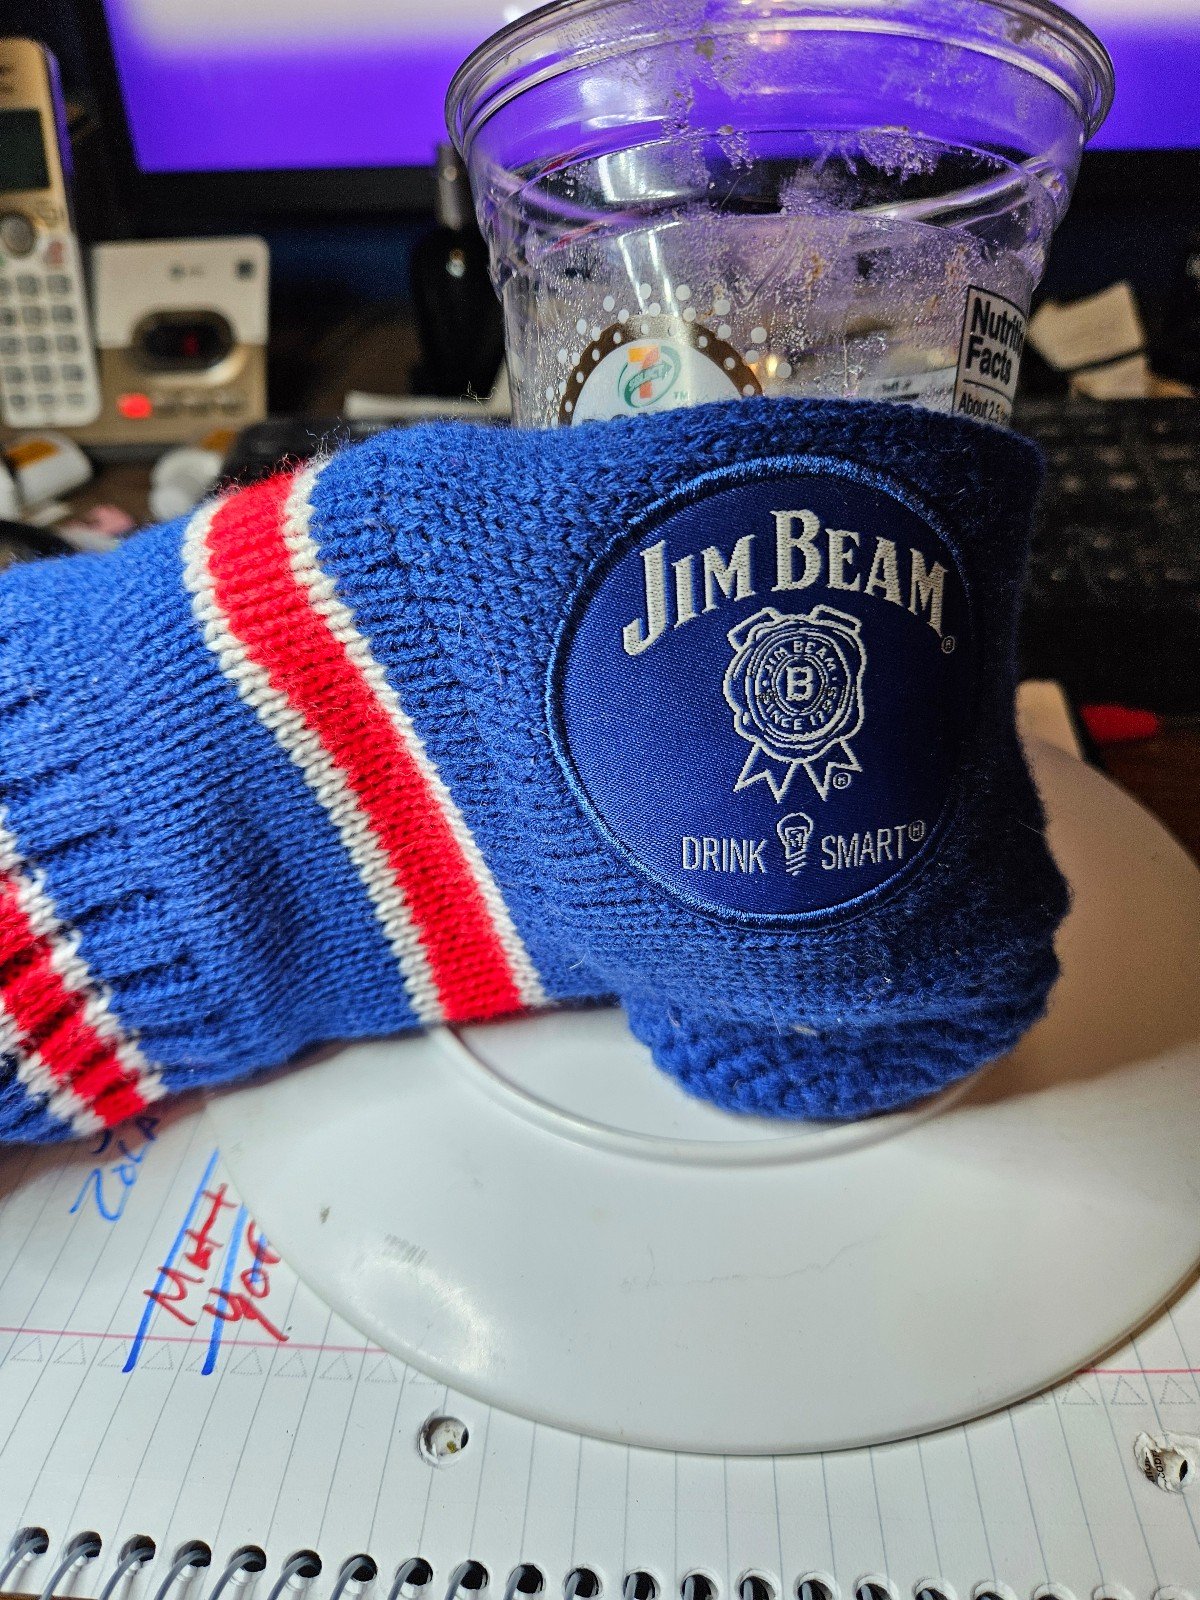 Cubs knit beer holder 33kWhgE6a